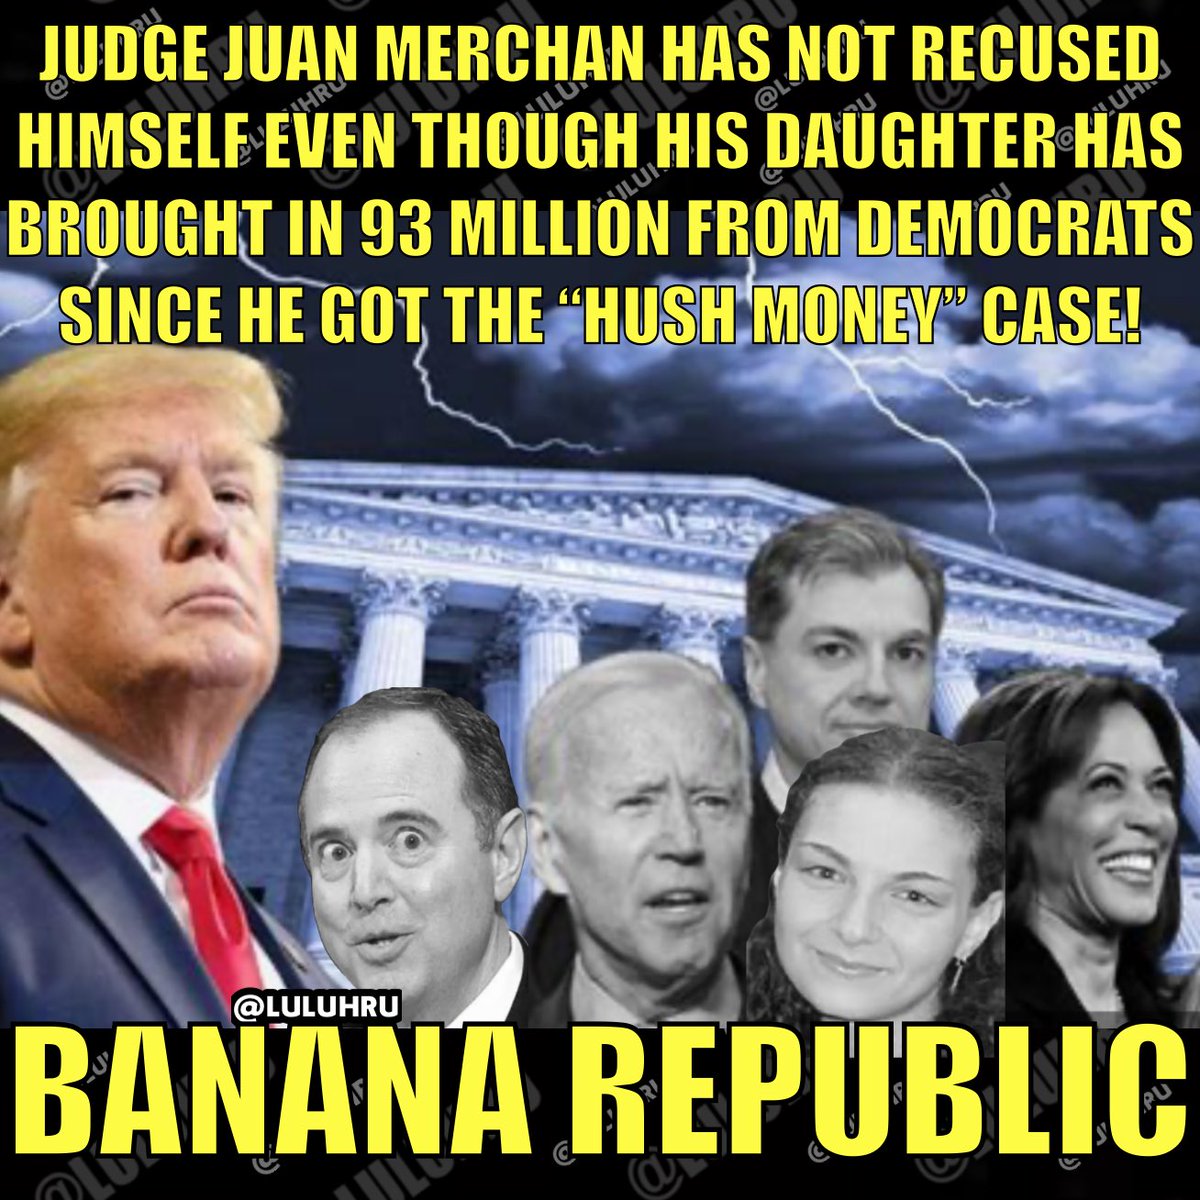 The judge has put a gag order on Trump because he doesn’t want this information exposed! The stench of impropriety is all over this case! The Judge’s daughter worked for the Kamala campaign and indirectly for the Biden/Harris campaign, she is currently working with Adam Schiff